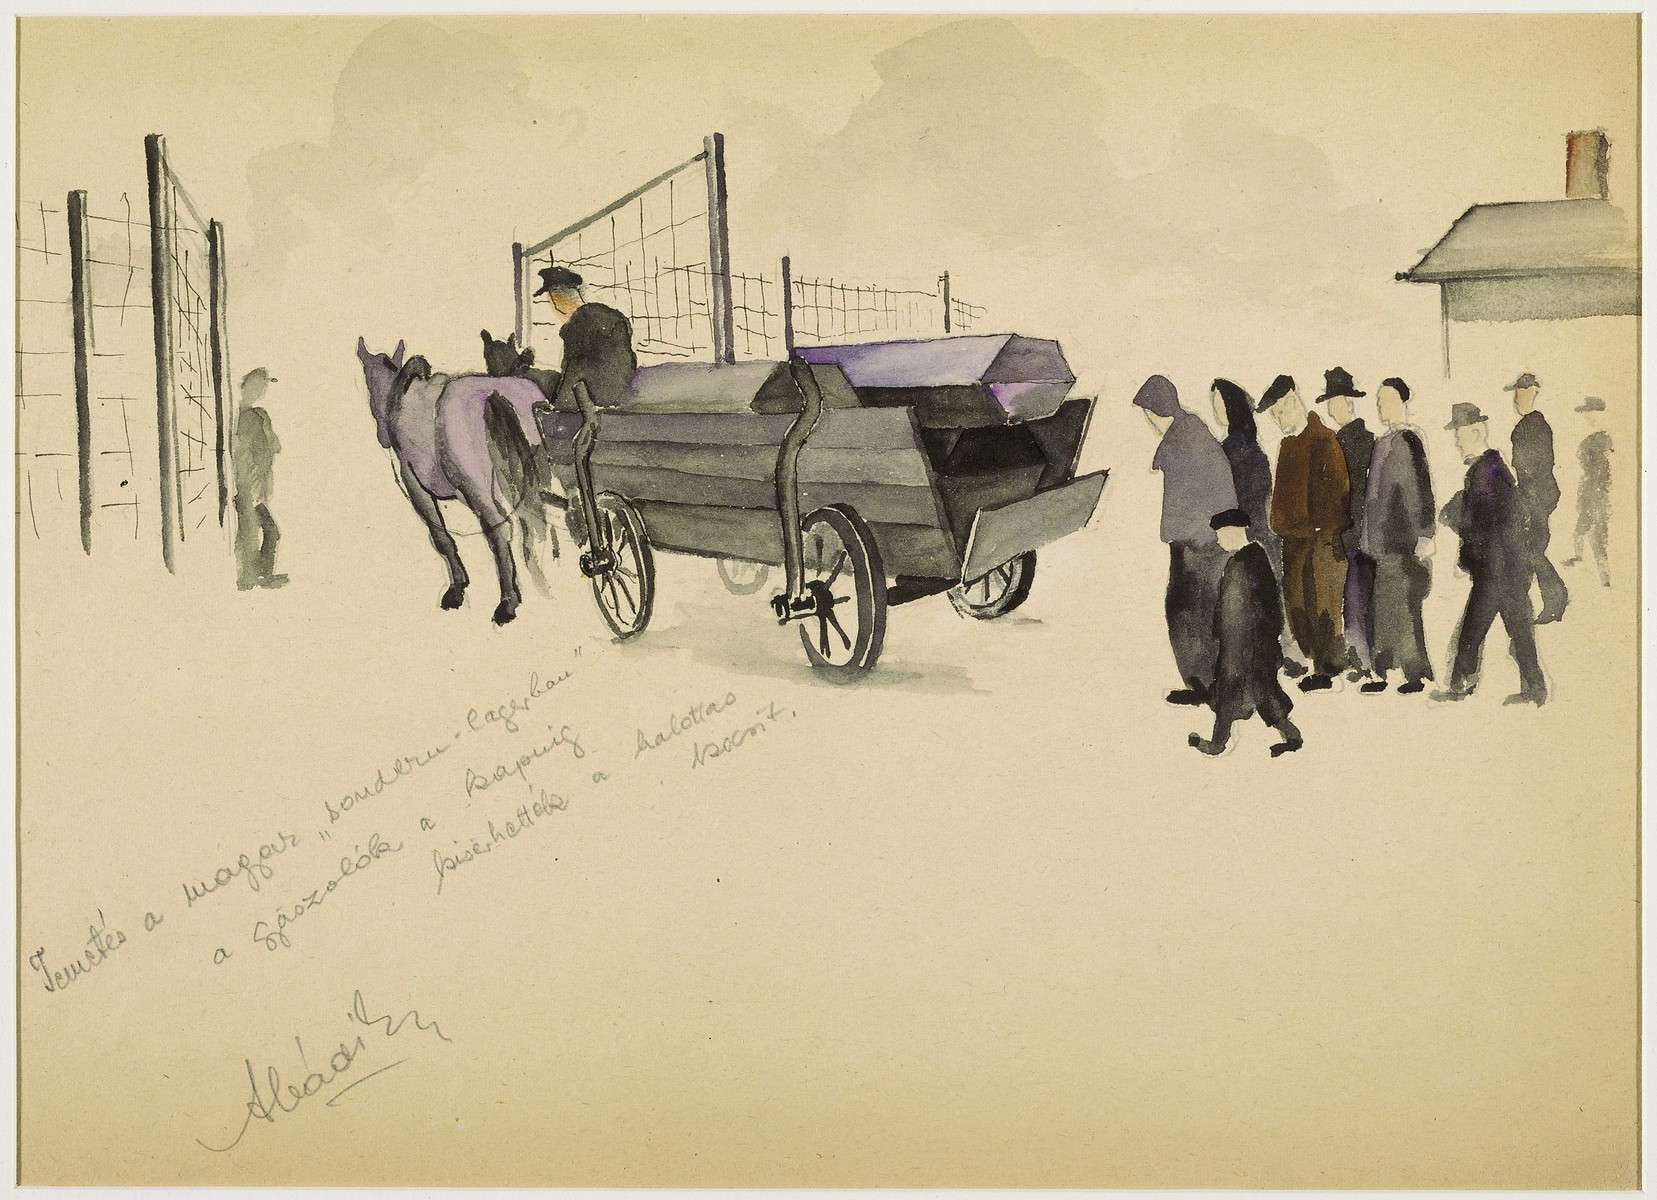 "Funeral in the Hungarian Sondern (Special-Lager- The Mourners were permitted to escort  the Hearse to the Gate" by Ervin Abadi. Watercolor and pencil drawing.

Ervin Abadi, a Hungarian Jew from Budapest, was an aspiring young artist when WWII began.  He was drafted into the Hungarian labor service in the early 1940s.  Abadi managed to escape, but  was recaptured and immediately deported to Bergen-Belsen.  When the camp was liberated, his condition was such that he required extended hospitalization.  During his convalescence, he created dozens of works of holocaust art, including ink drawings, pencil and ink sketches and  watercolors.
After recuperating Abadi returned to Budapest, where he published a collection of his watercolors in 1946.  After becoming disillusioned with the communist regime in Hungary, he moved to Israel, where he continued to publish in Hungarian and Hebrew.  He died in Israel in 1980.